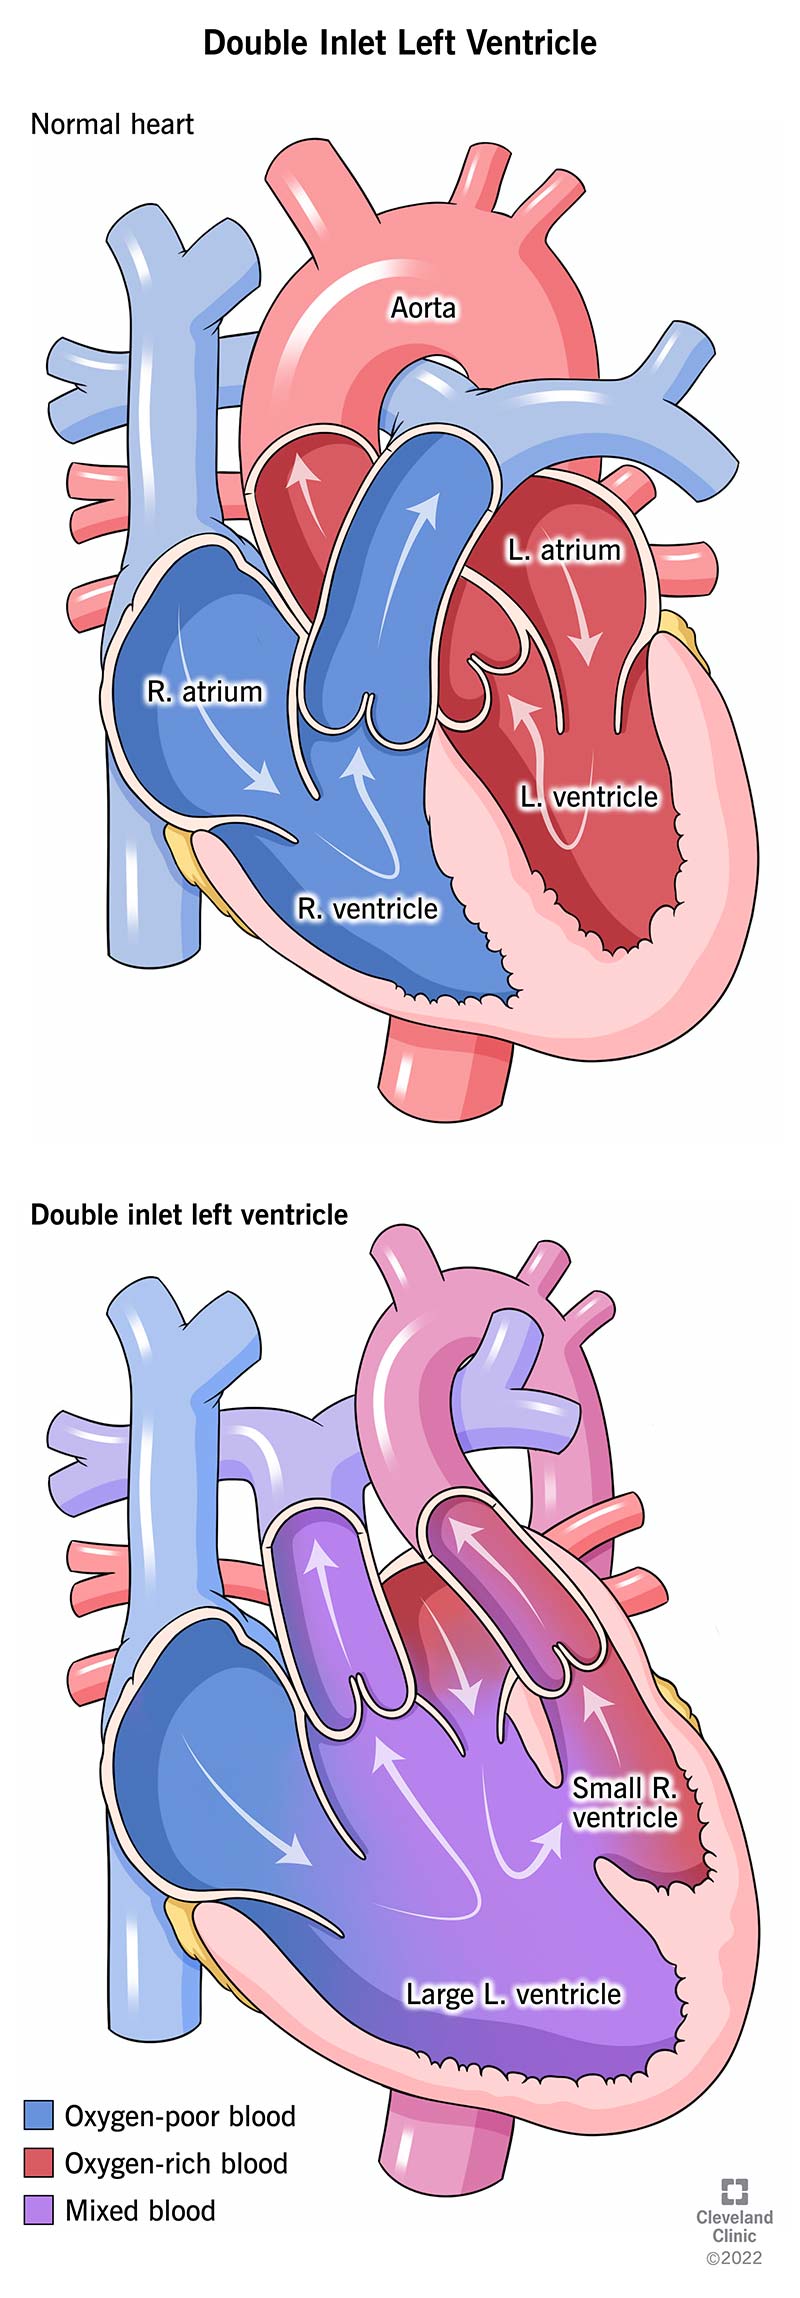 With double inlet left ventricle, both of your baby’s atria supply blood to their left ventricle, resulting in oxygen-rich blood and oxygen-poor blood combining.